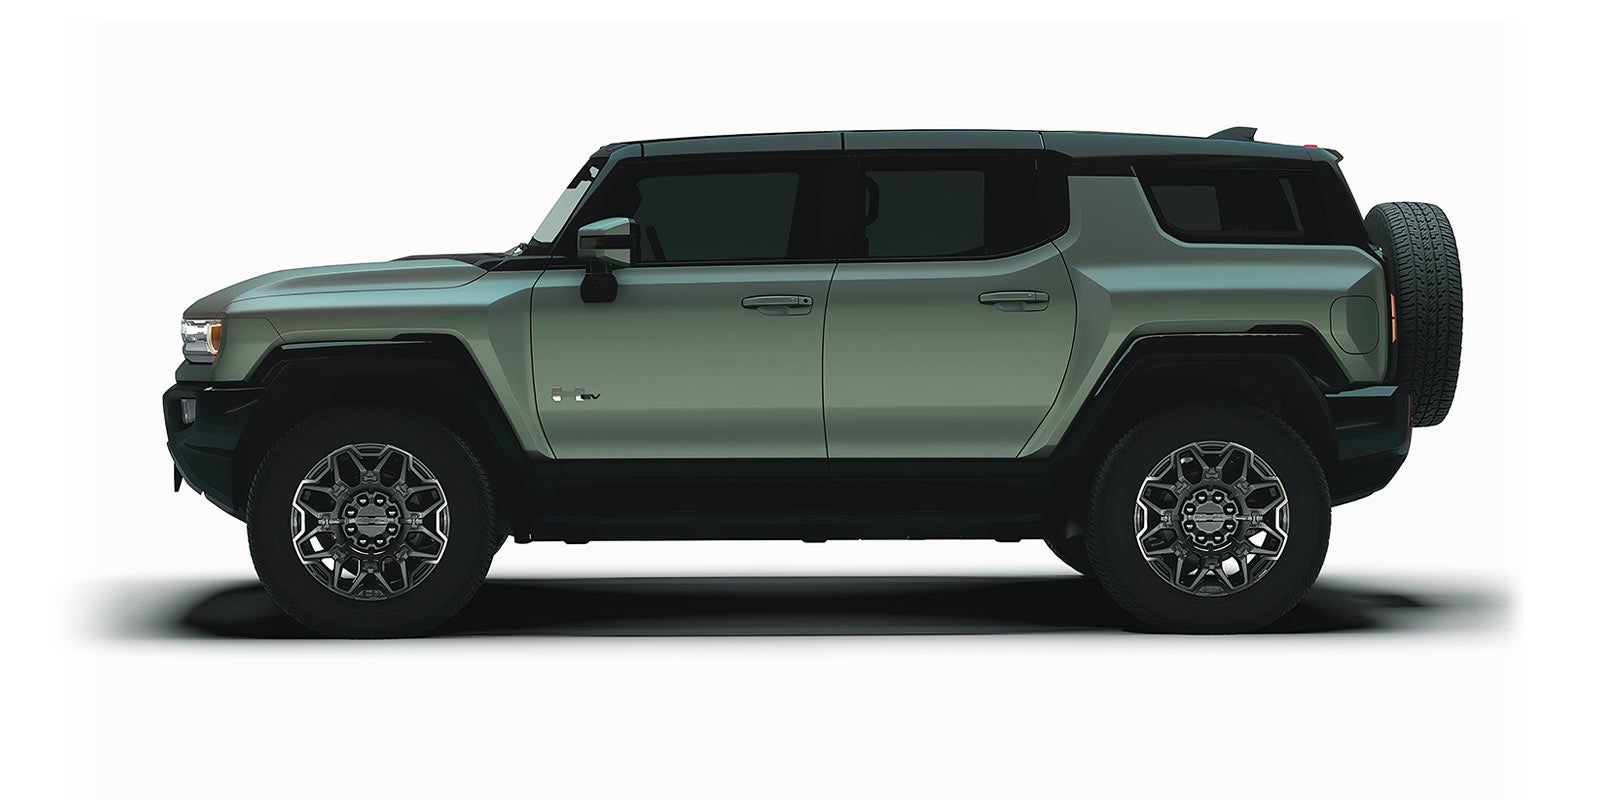 hummer ev pickup and hummer ev | LaFontaine Buick GMC Highland in Highland Charter Township MI